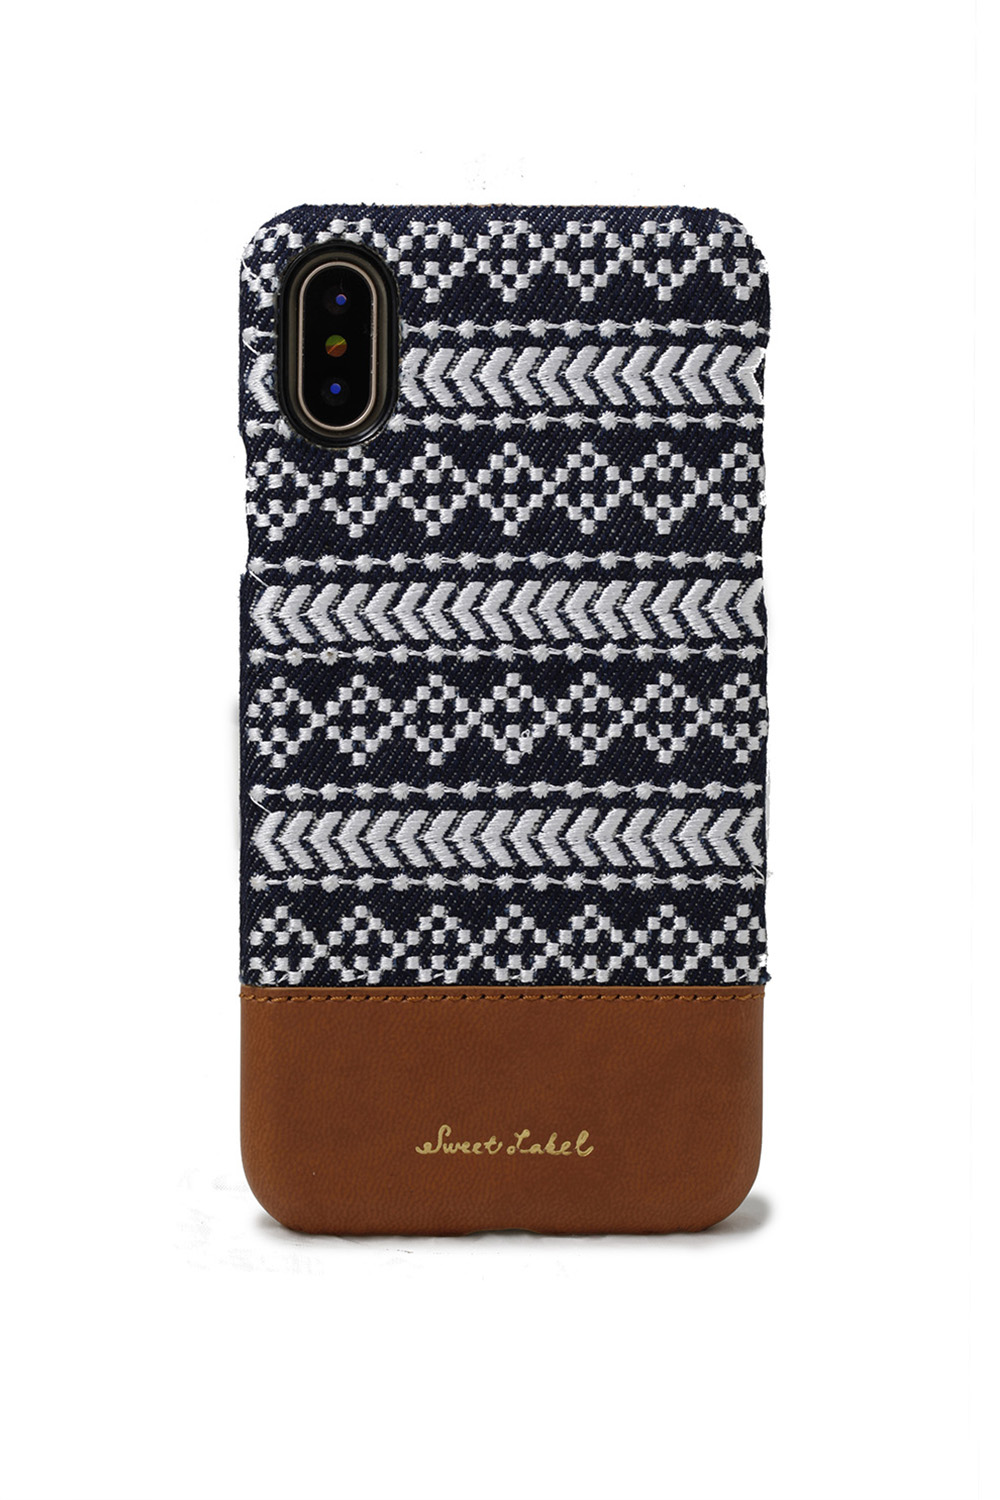 Folklore Single For iPhone X Case